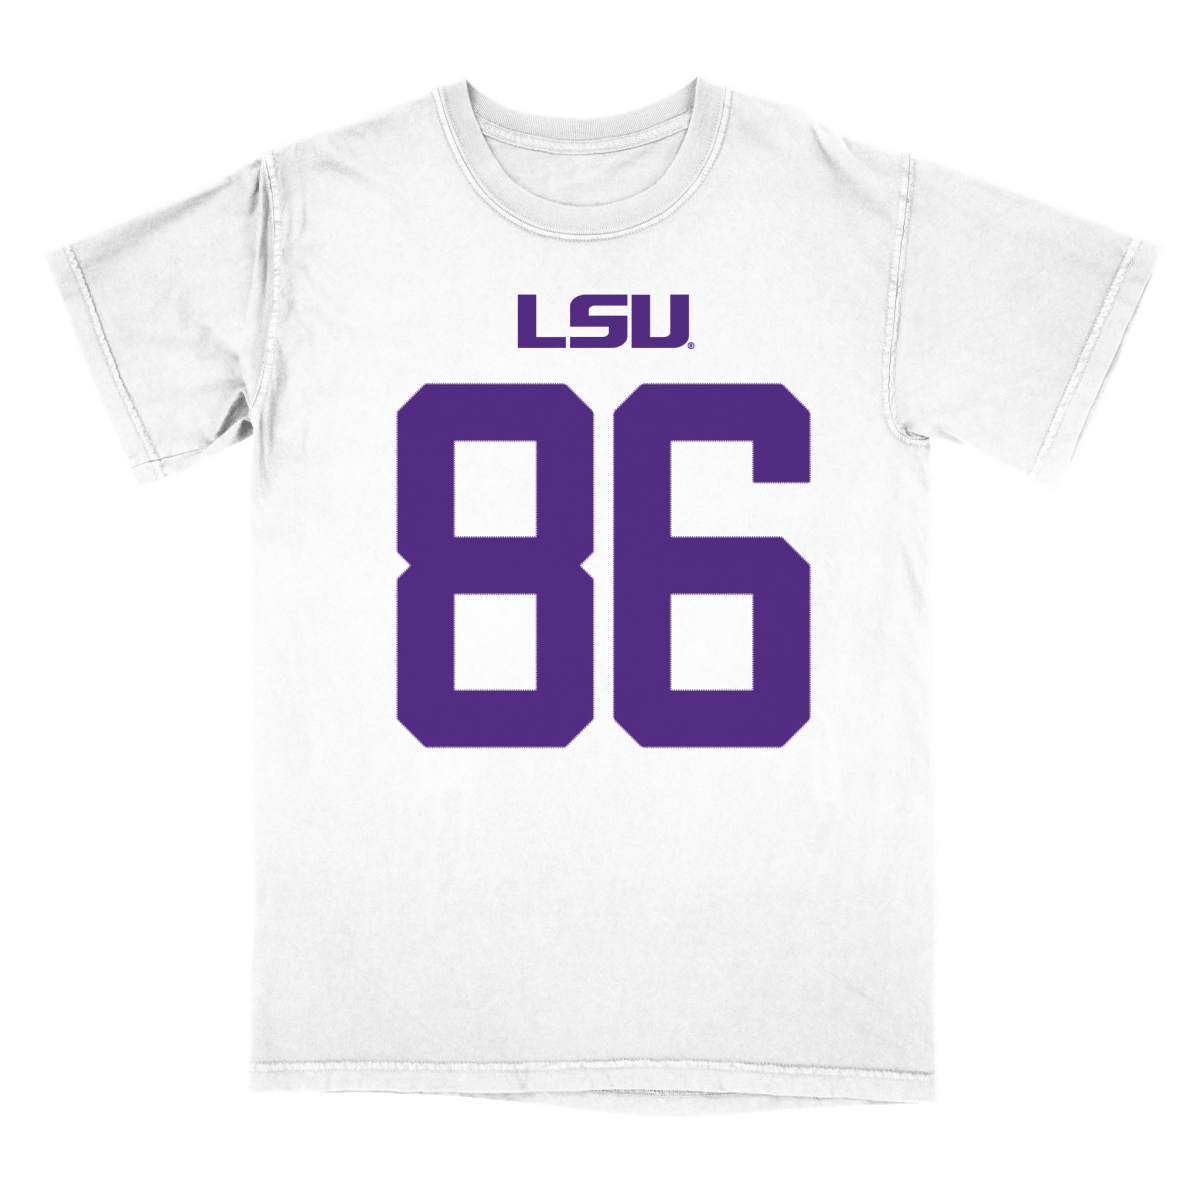 Available] Get New Custom LSU Tigers Baseball Jersey White